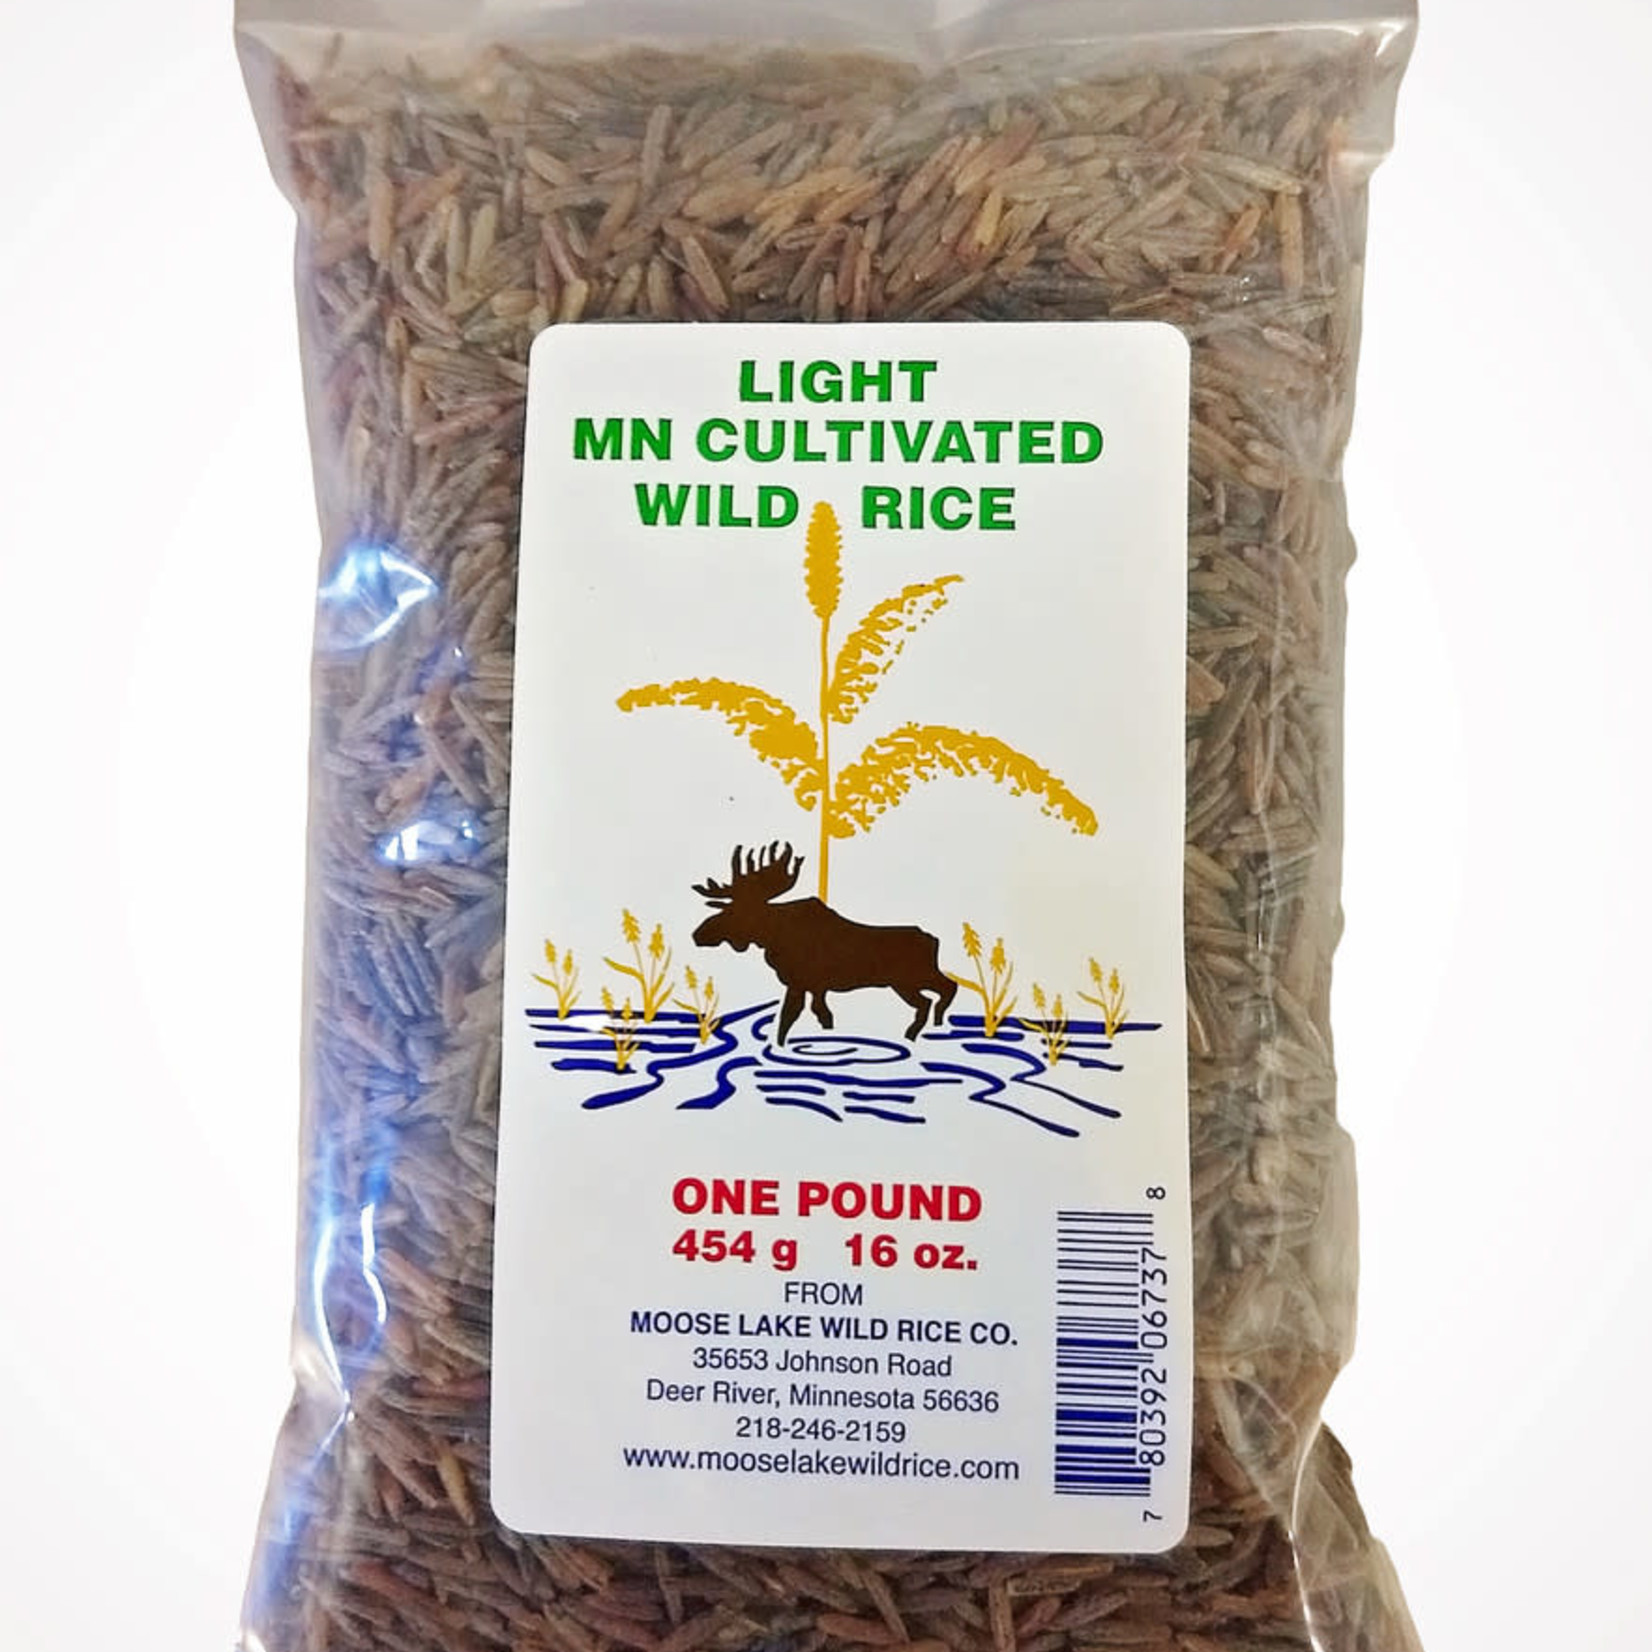 Moose Lake Wild Rice Light Cultivated Wild Rice - 1lb.